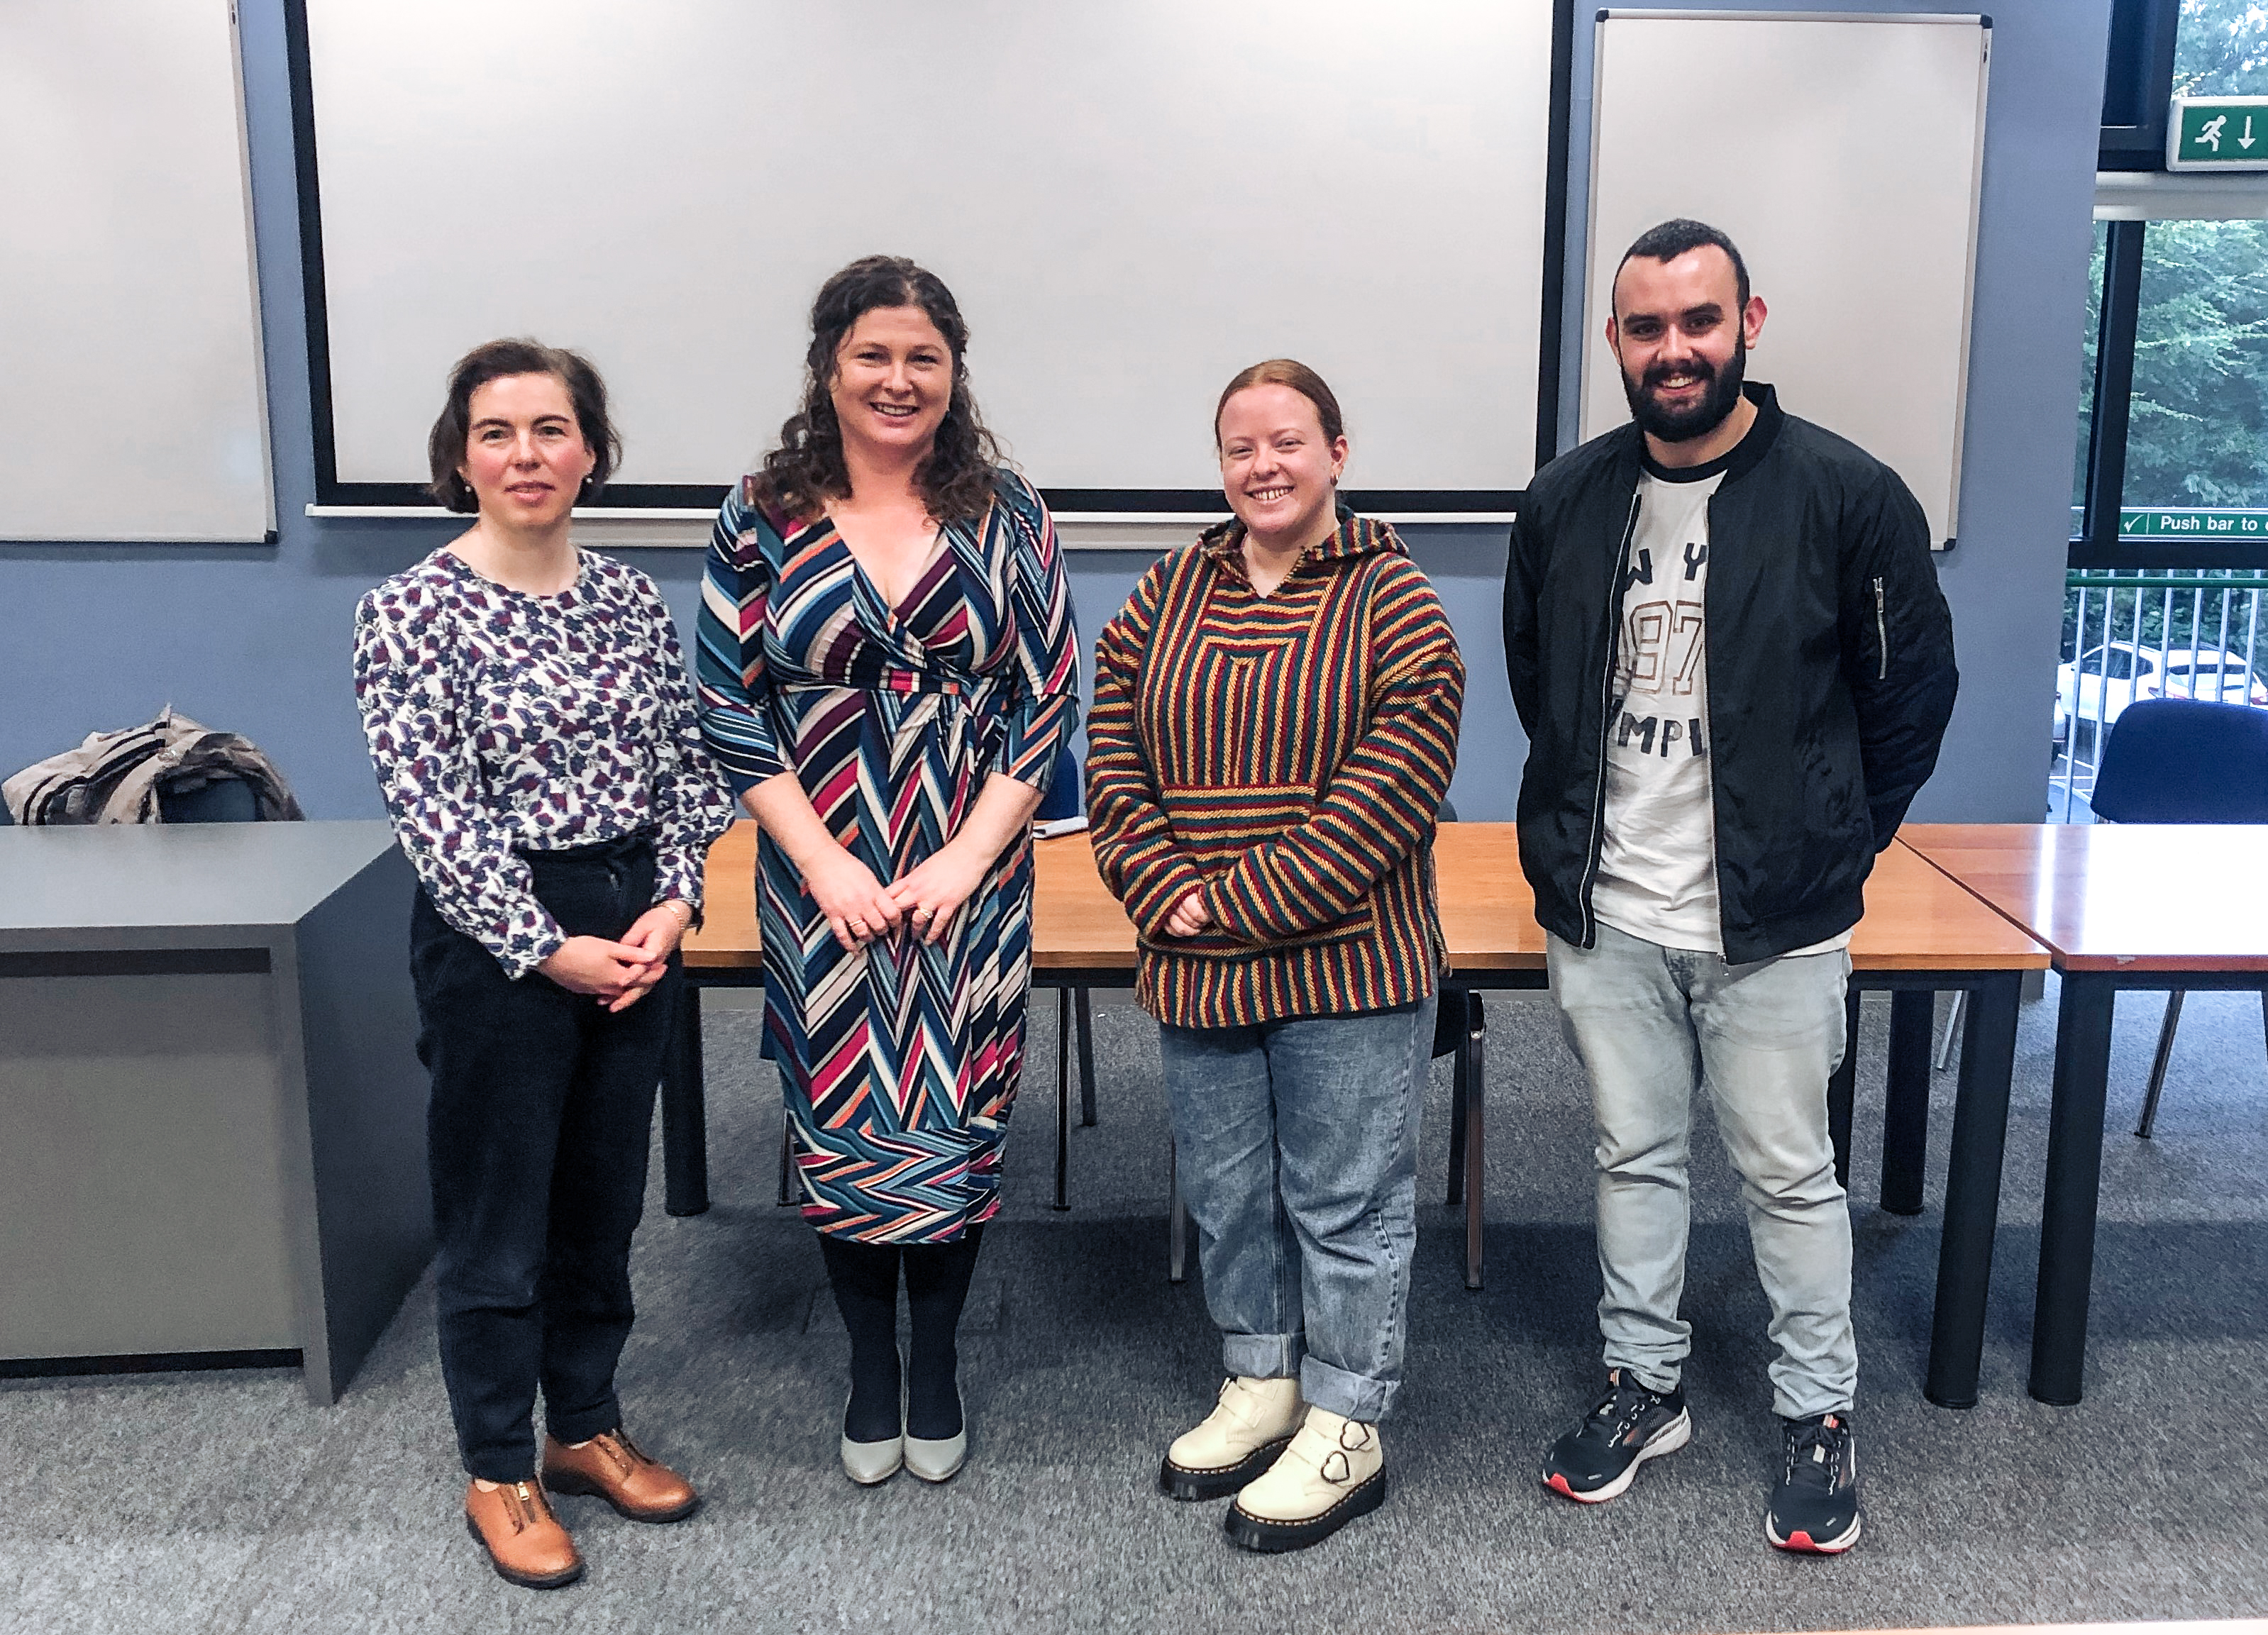 The School of Pharmacy was delighted to welcome Ms Esther Barry to speak to pharmacy students undertaking the Cardiovascular and Renal module in 3rd year of the programme.